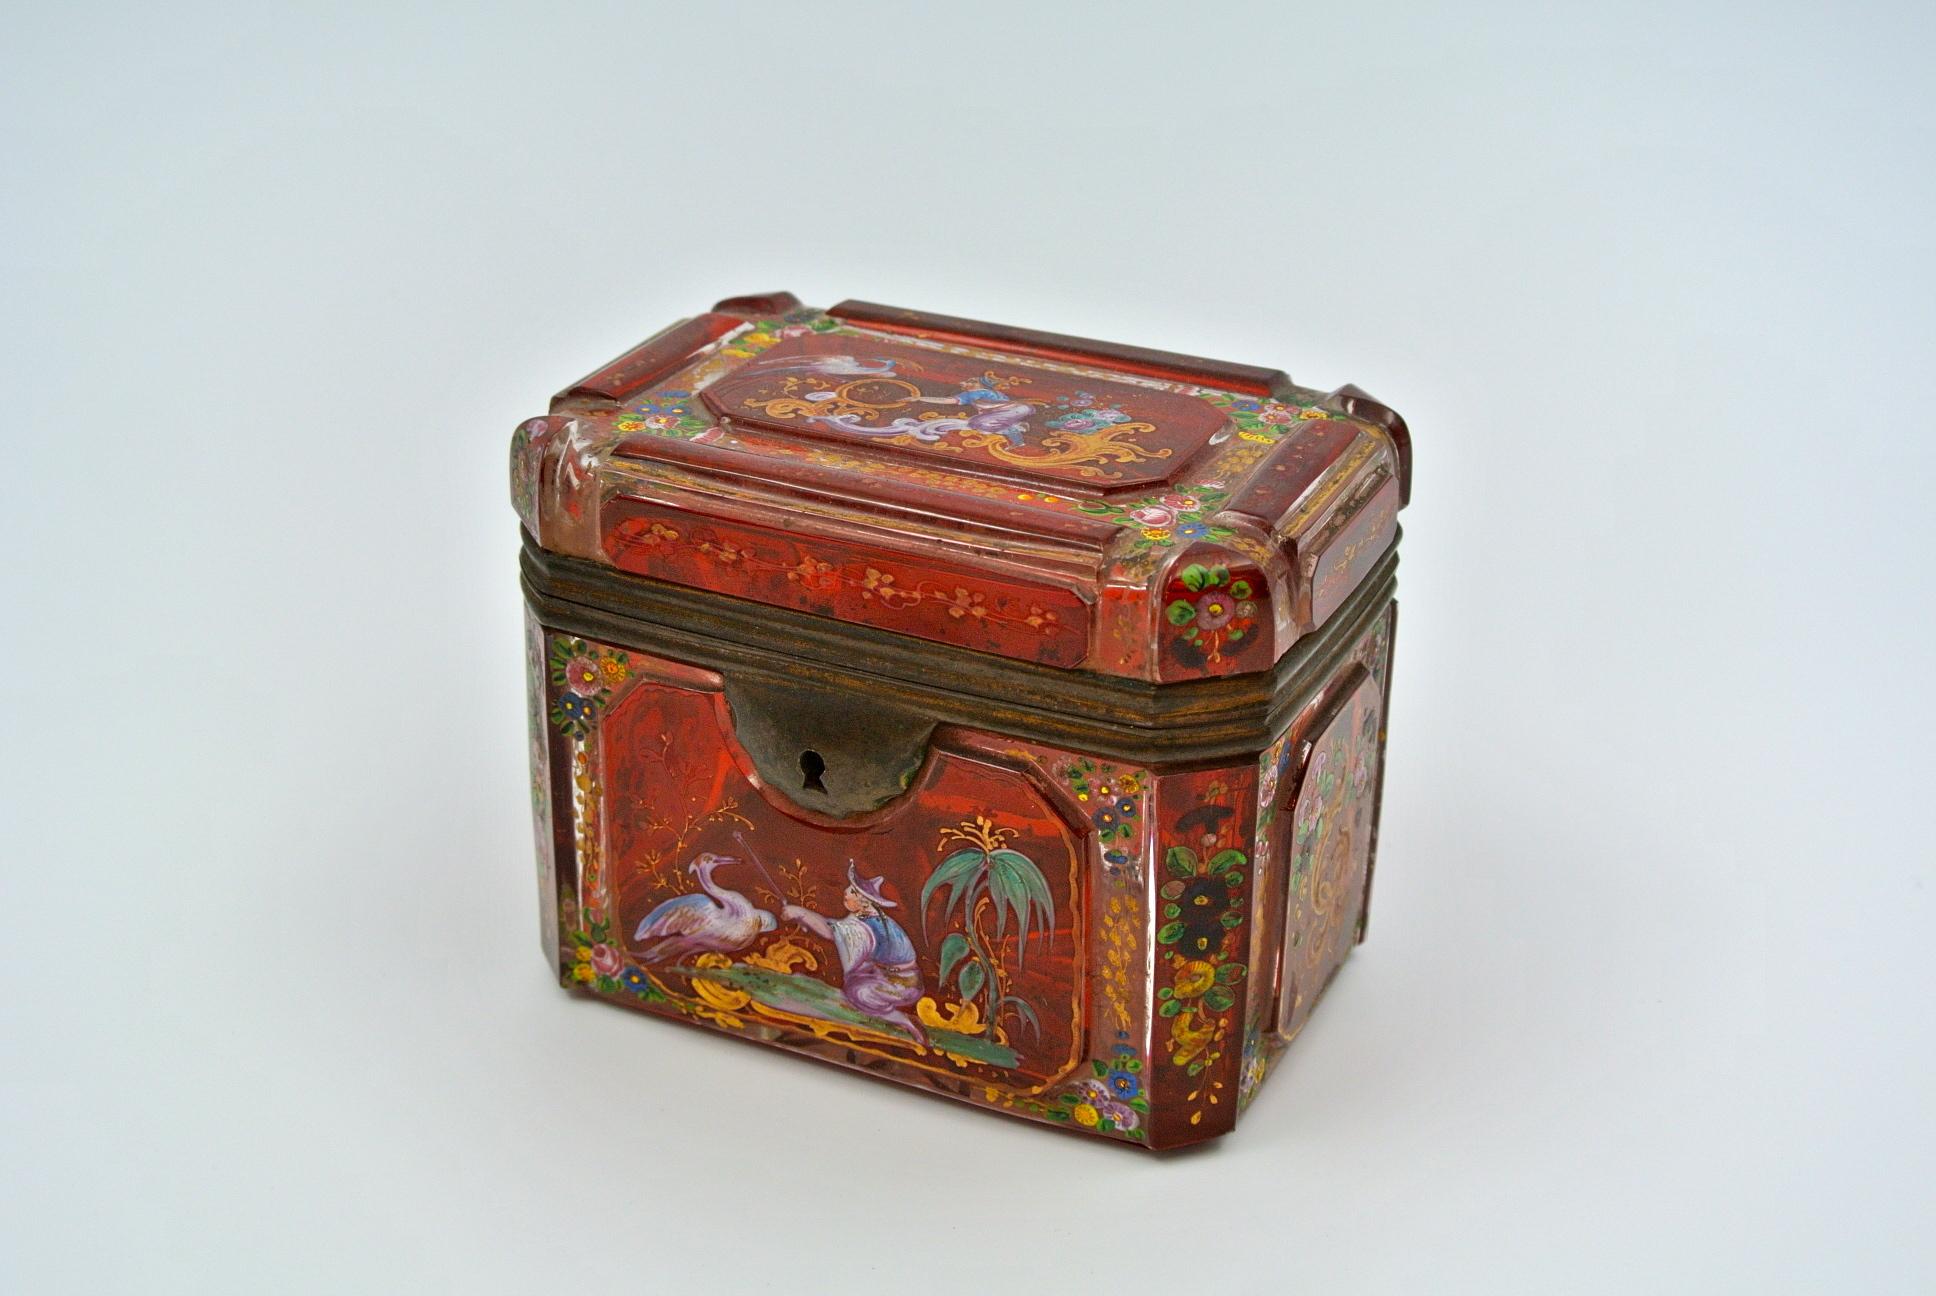 Bohemian box and Bohemian crystal enameled with Chinoisant decoration, 19th century, Napoleon III period

Measures: H 9cm, W 11cm, D 7cm.